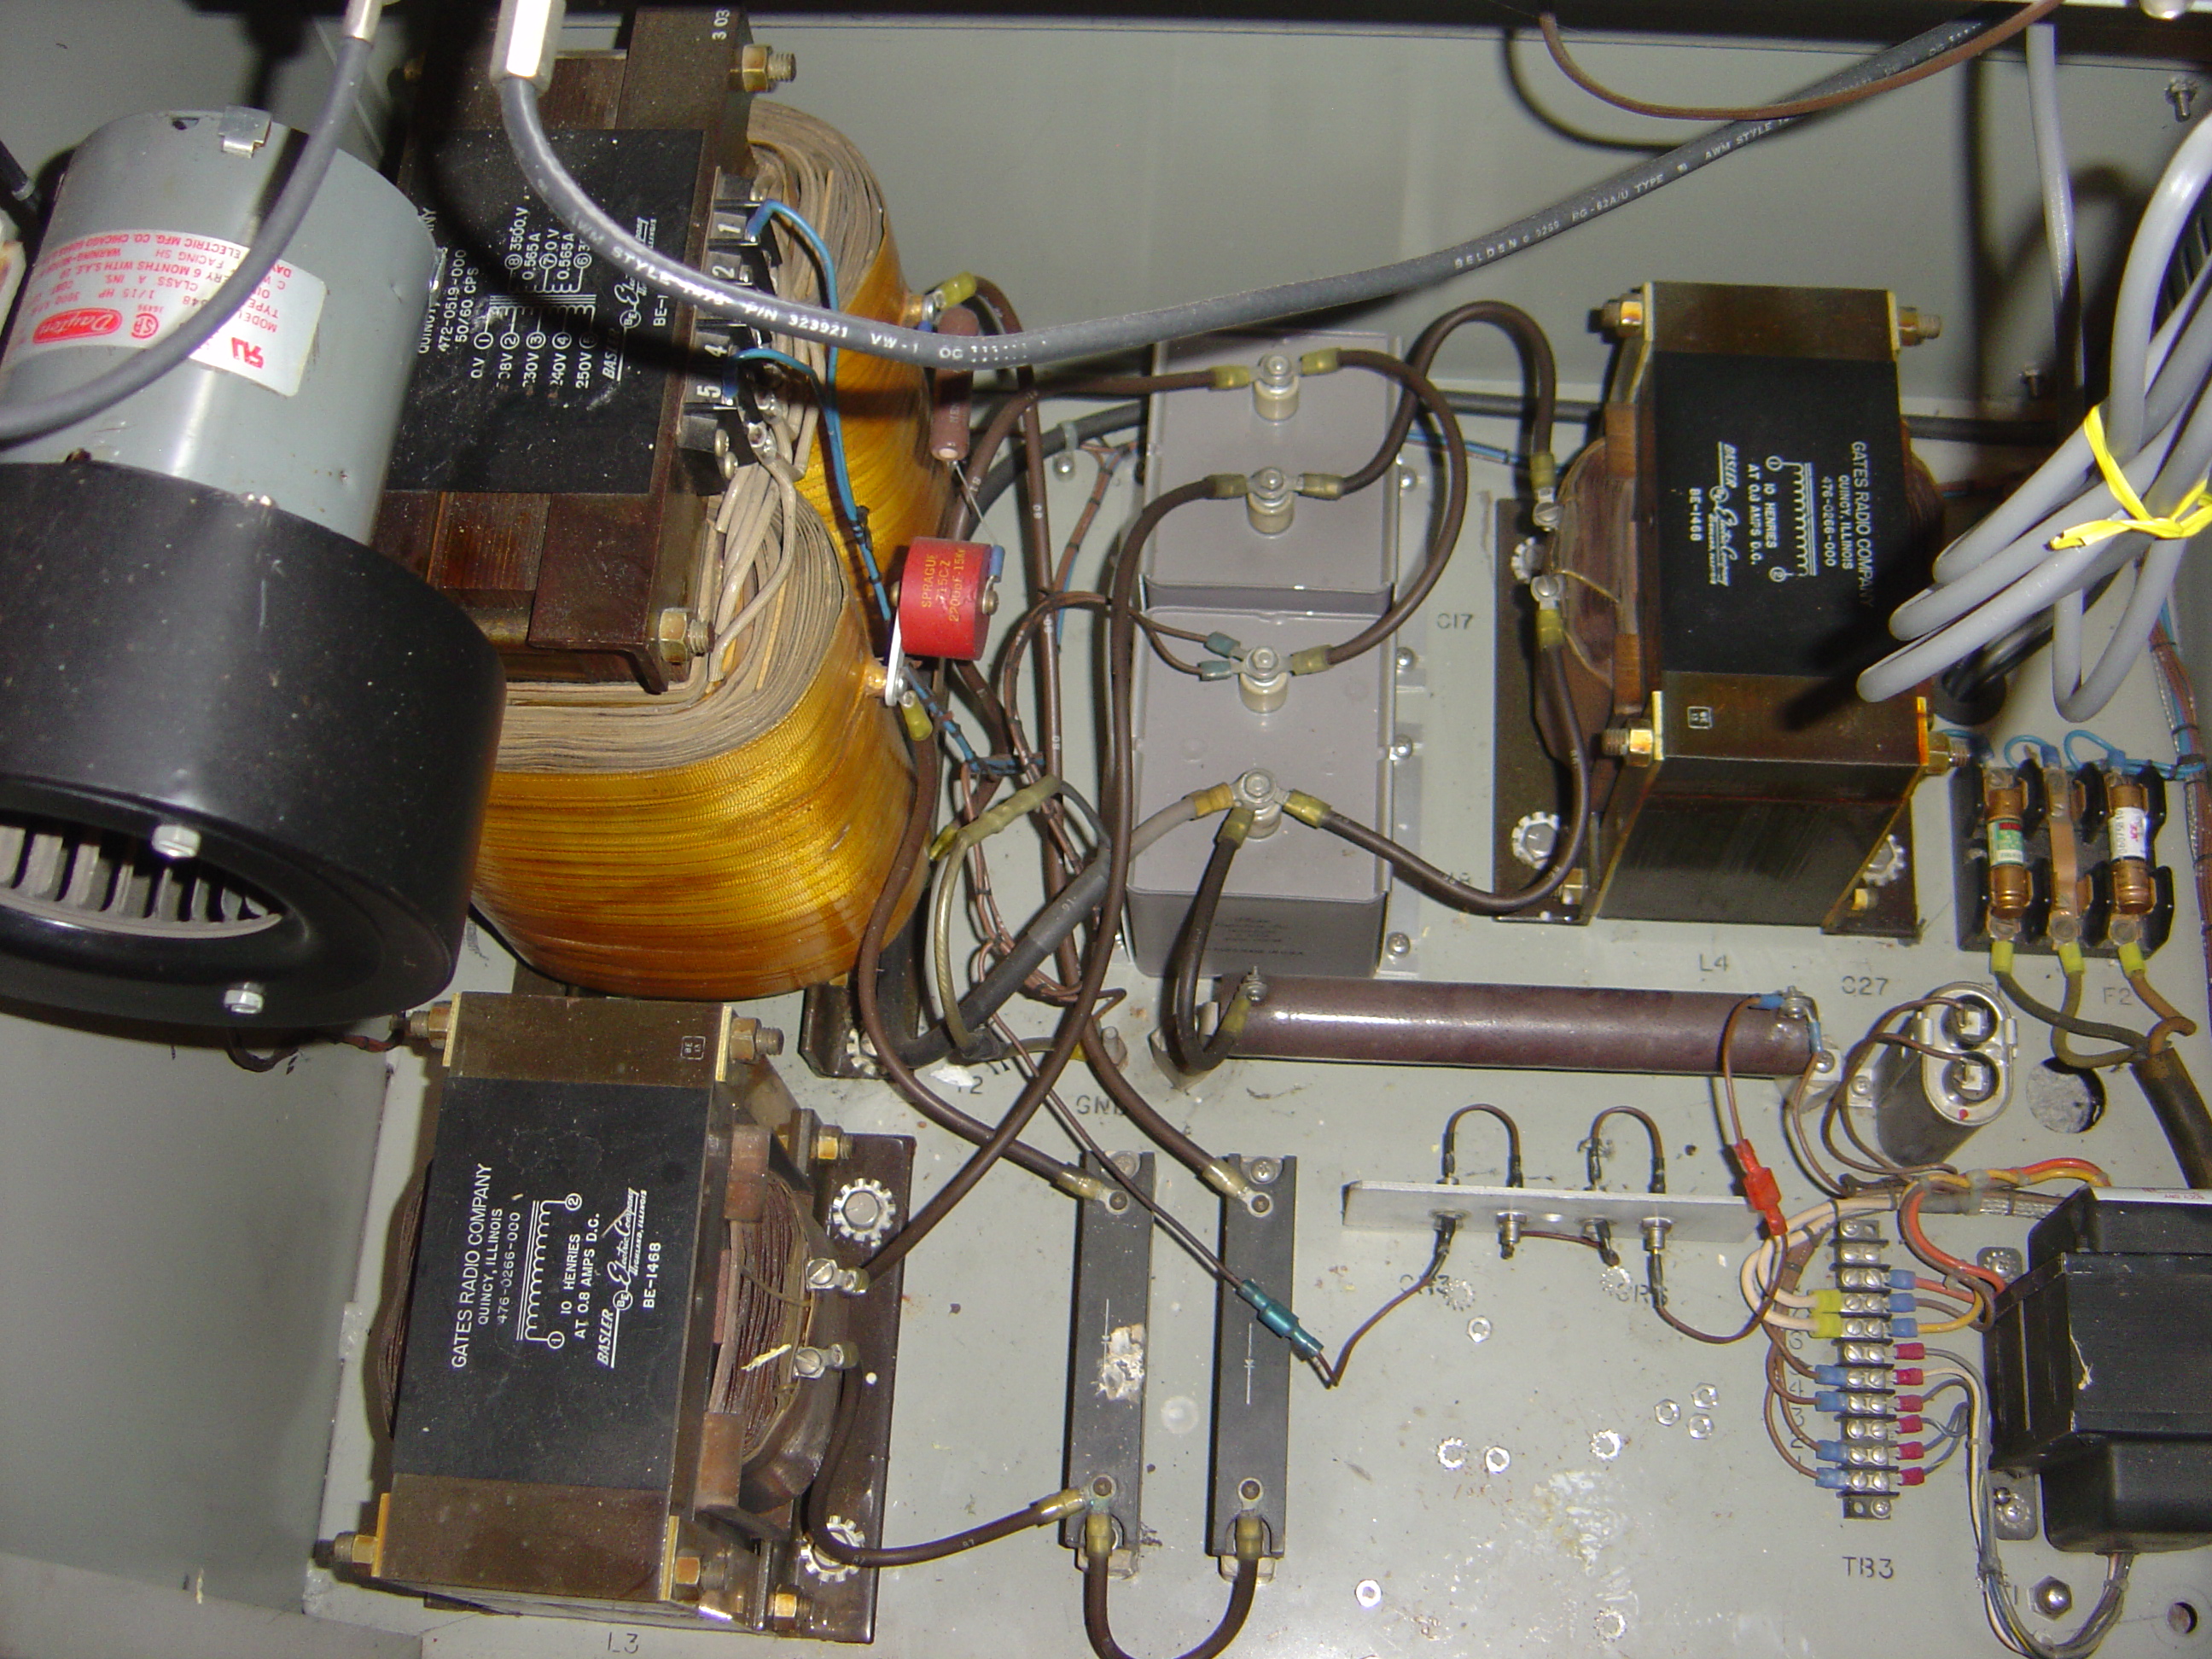 Picture of the inside of the Transmitter - Left Rear is Power Transformer. <br>Yeah, I know you don't care.